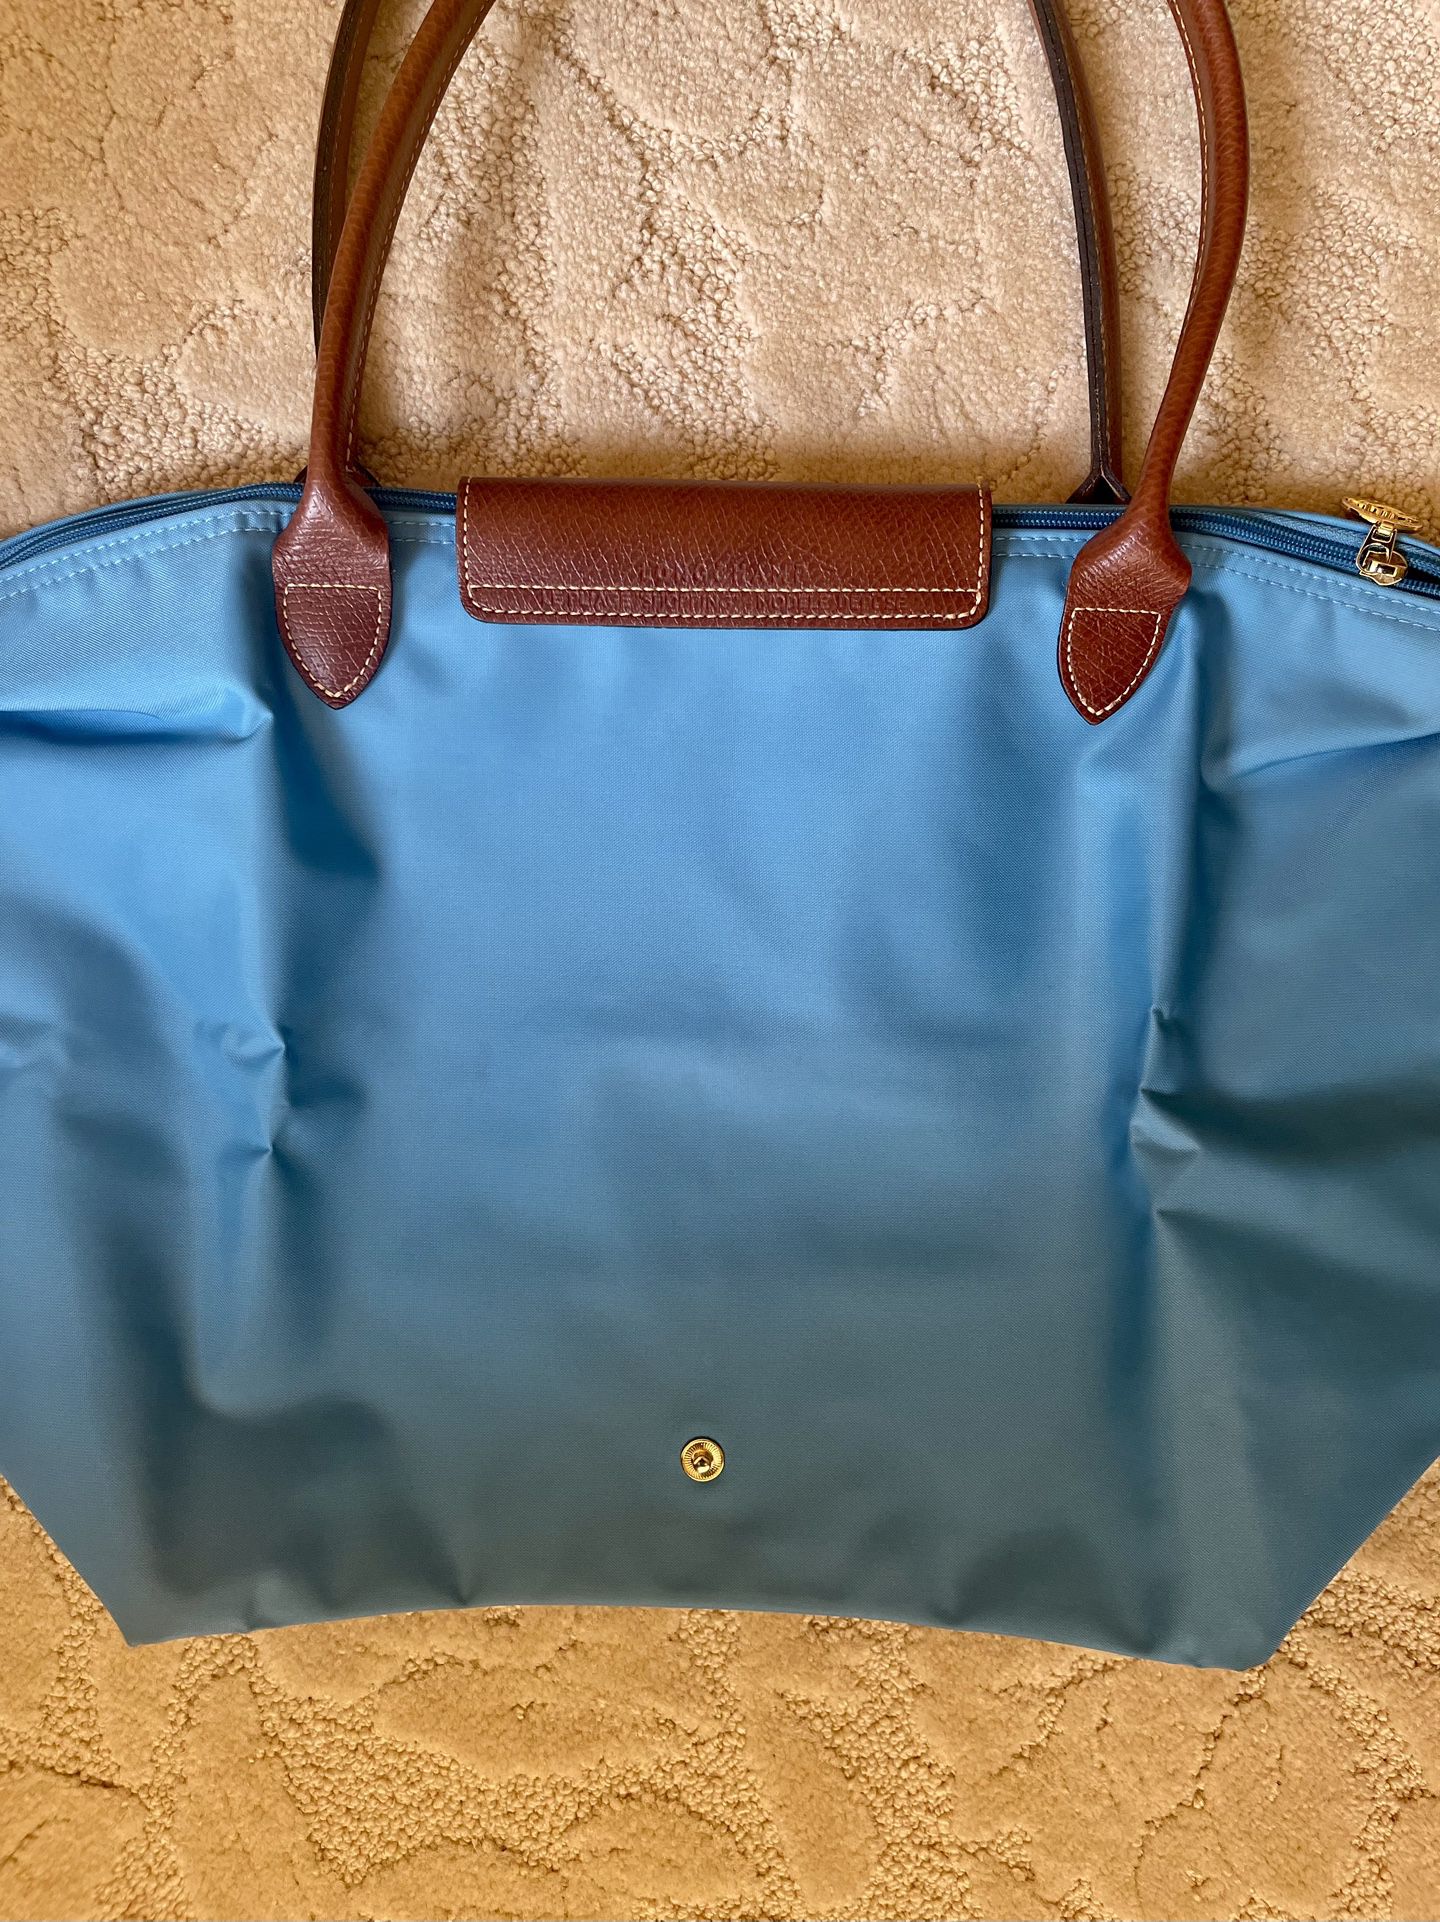 Longchamp Le Pliage Neo Extra Small Tote for Sale in Queens, NY - OfferUp